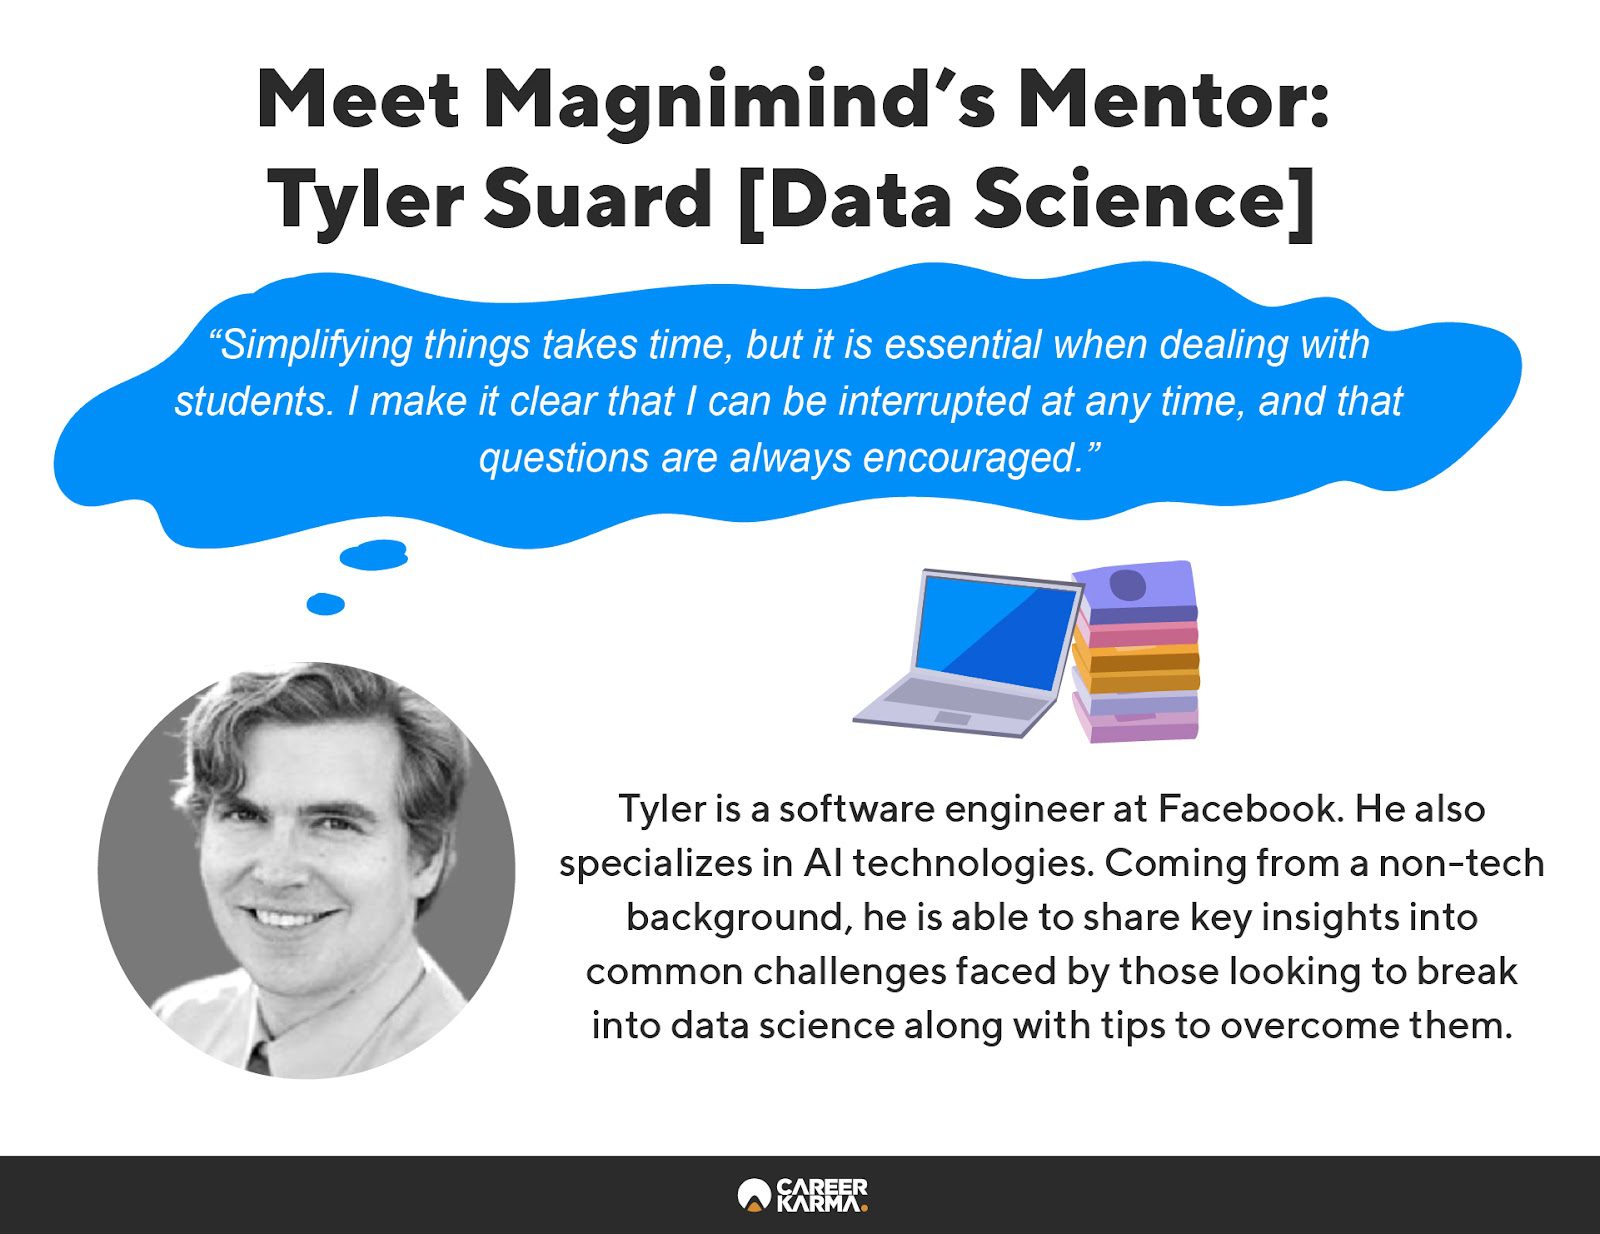 Infographic highlighting the profile of Magnimind’s mentor Tyler Suard